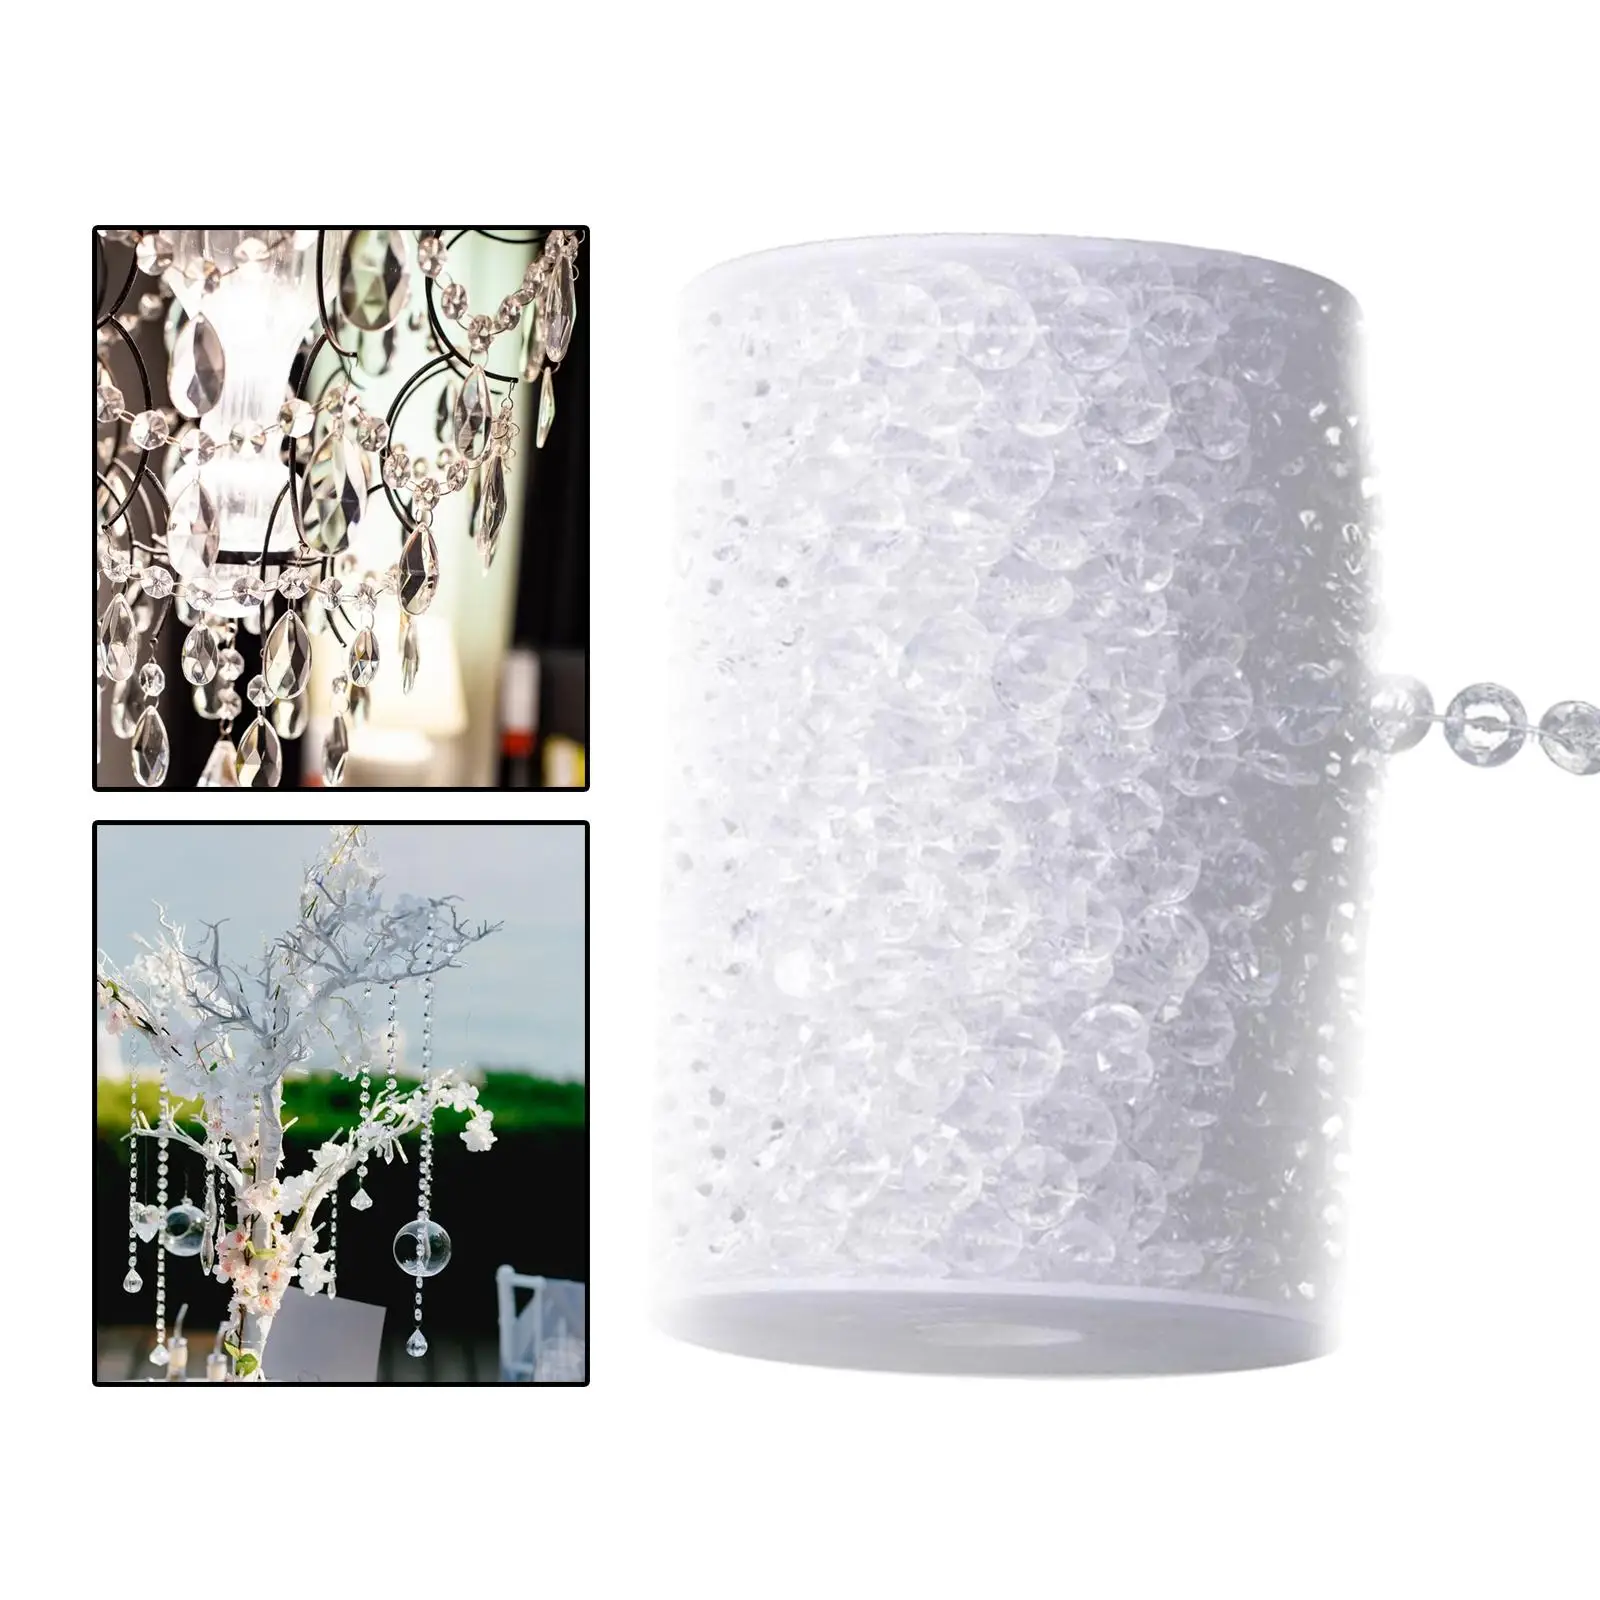 Crystal Bead Chain Acrylic Transparent Crystal Bead Garland  Lamp   Decorations 30 M/ 98 FT